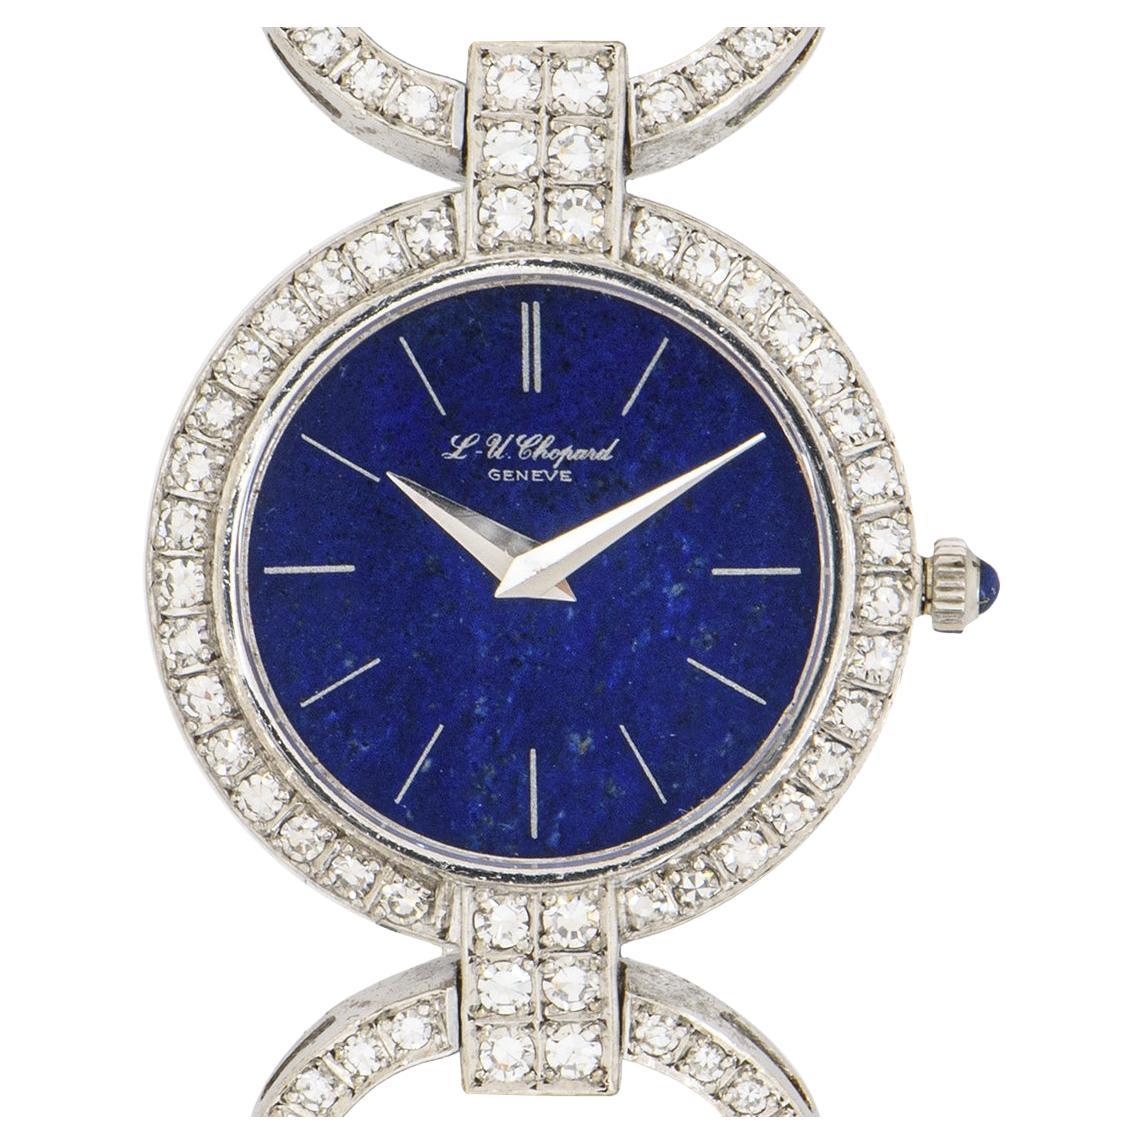 A Ladies 25mm Chopard Diamond set wristwatch, crafted in white gold. Featuring a distinctive lapis lazule dial with a white gold fixed bezel set with 92 round brilliant diamonds weighing 0.78ct and a crown set with a cabochoon.

Fitted with a